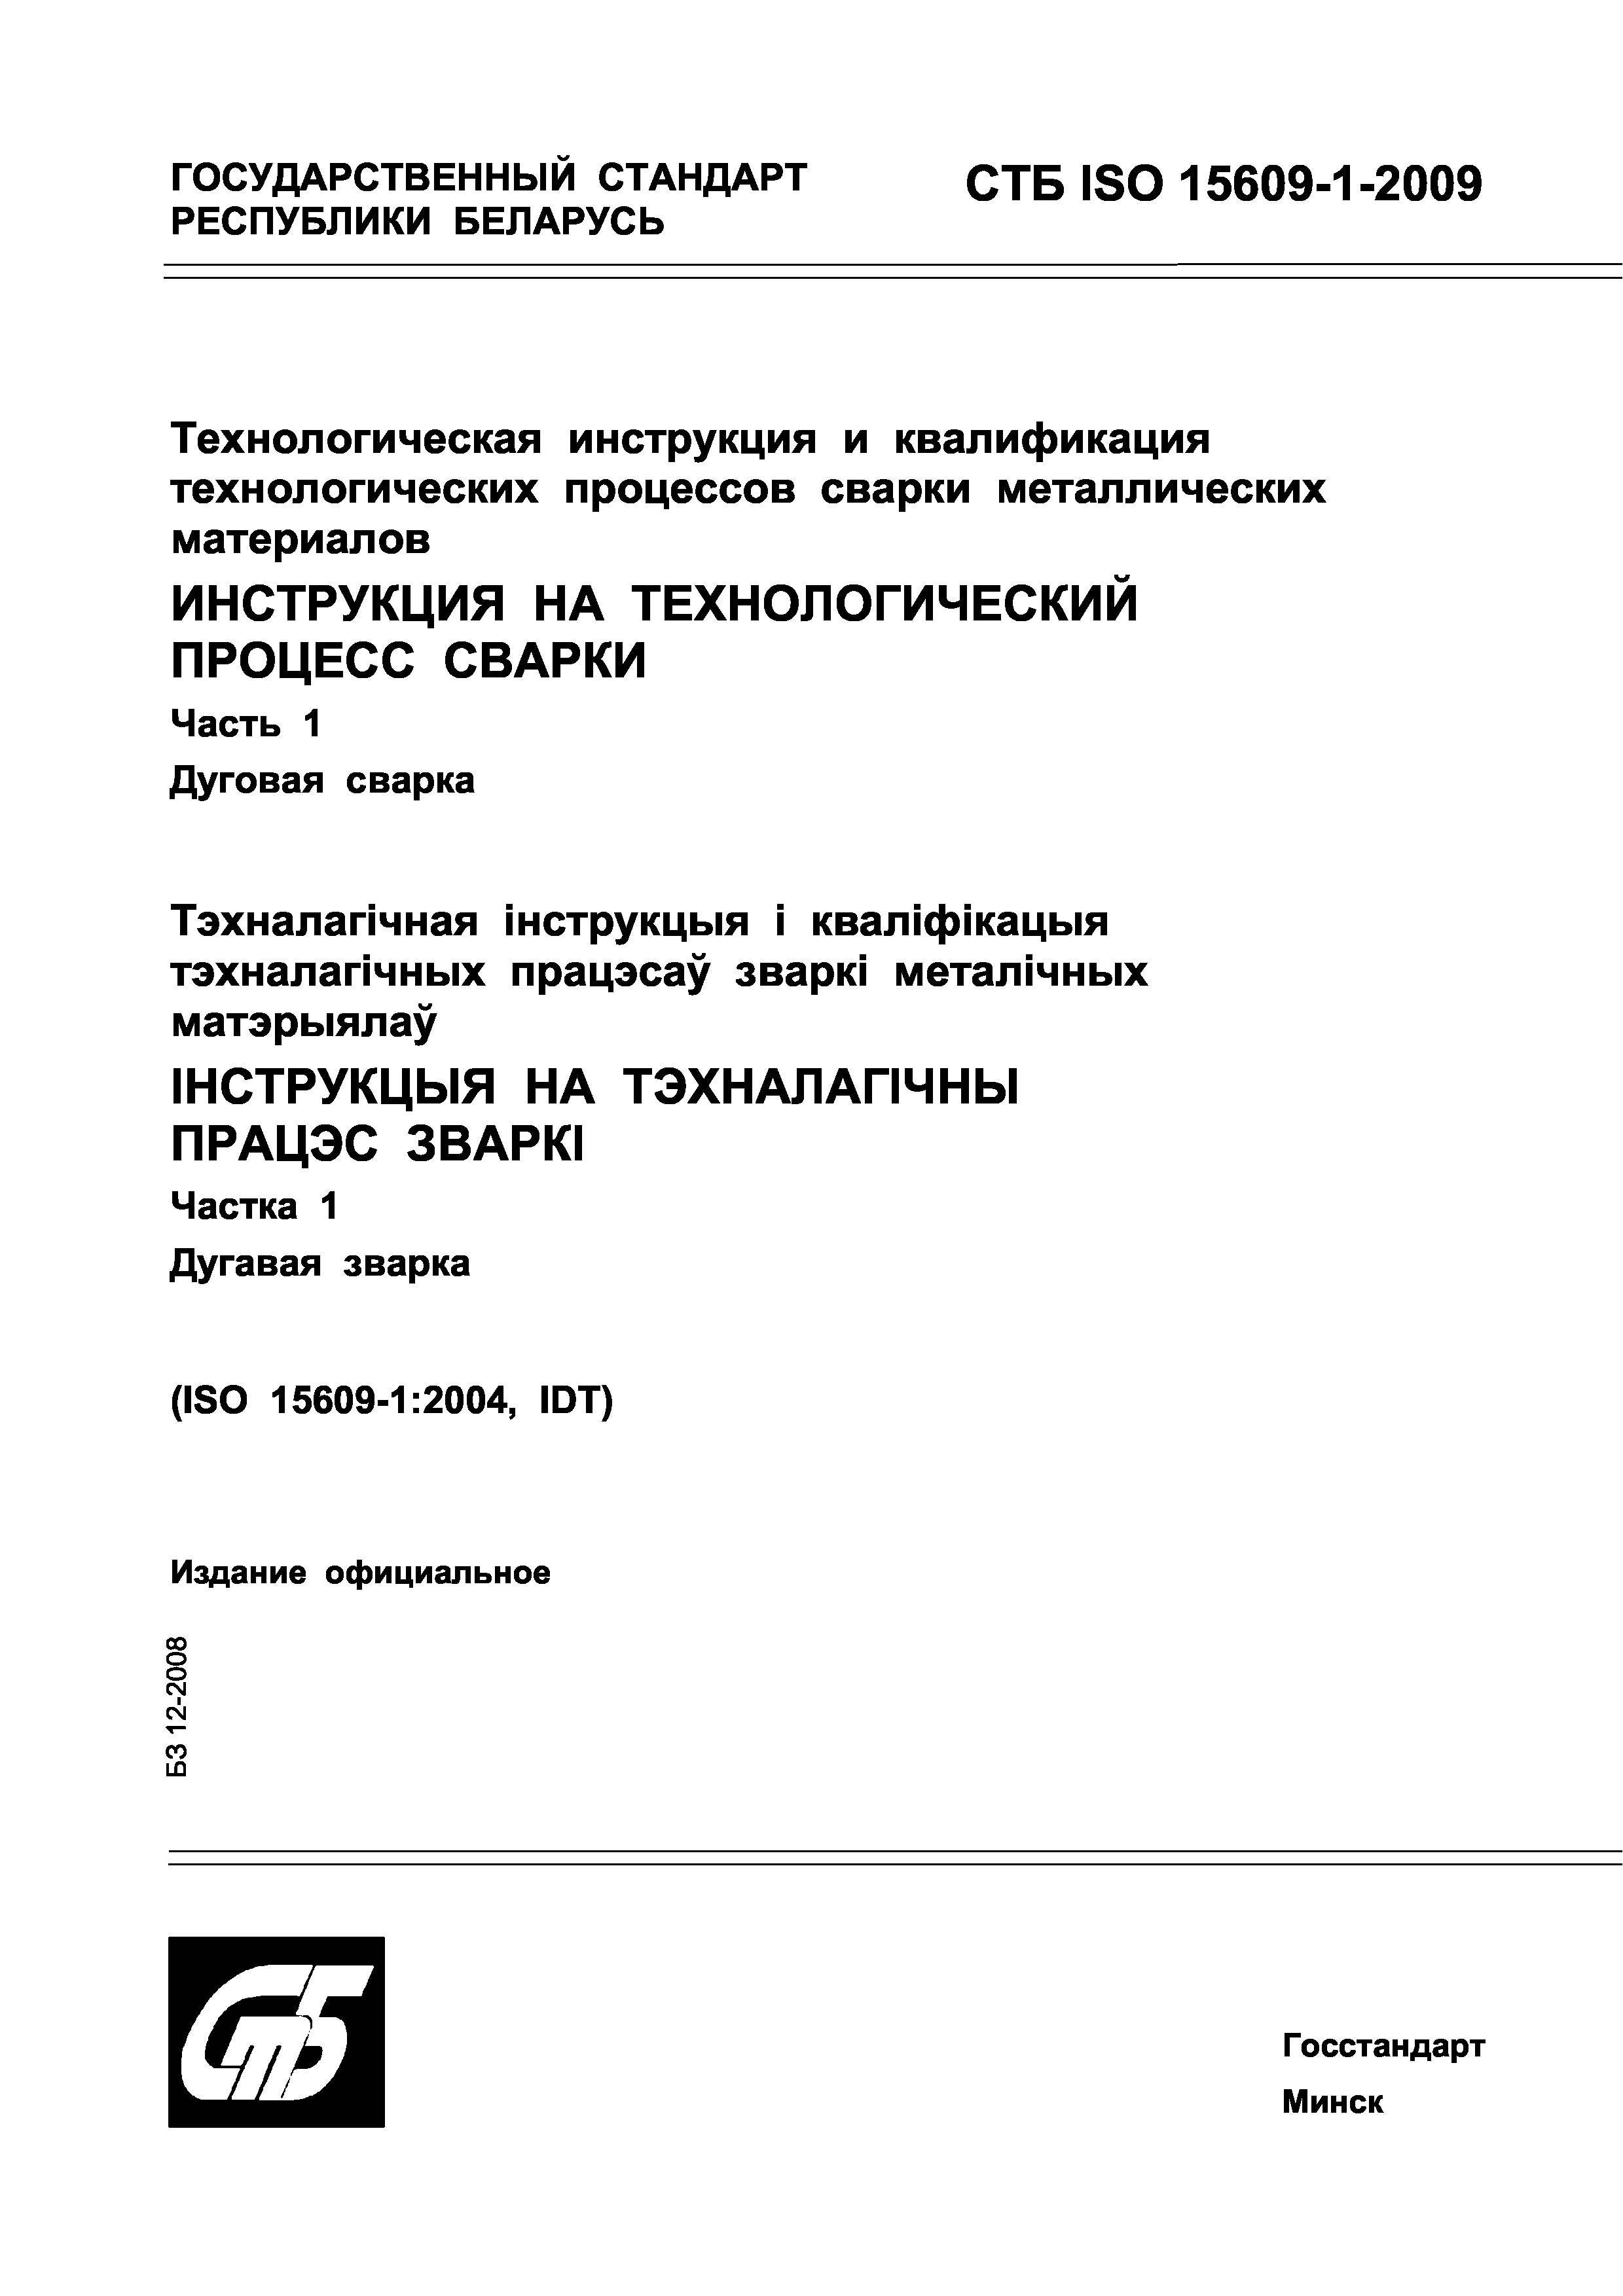 СТБ ISO 15609-1-2009